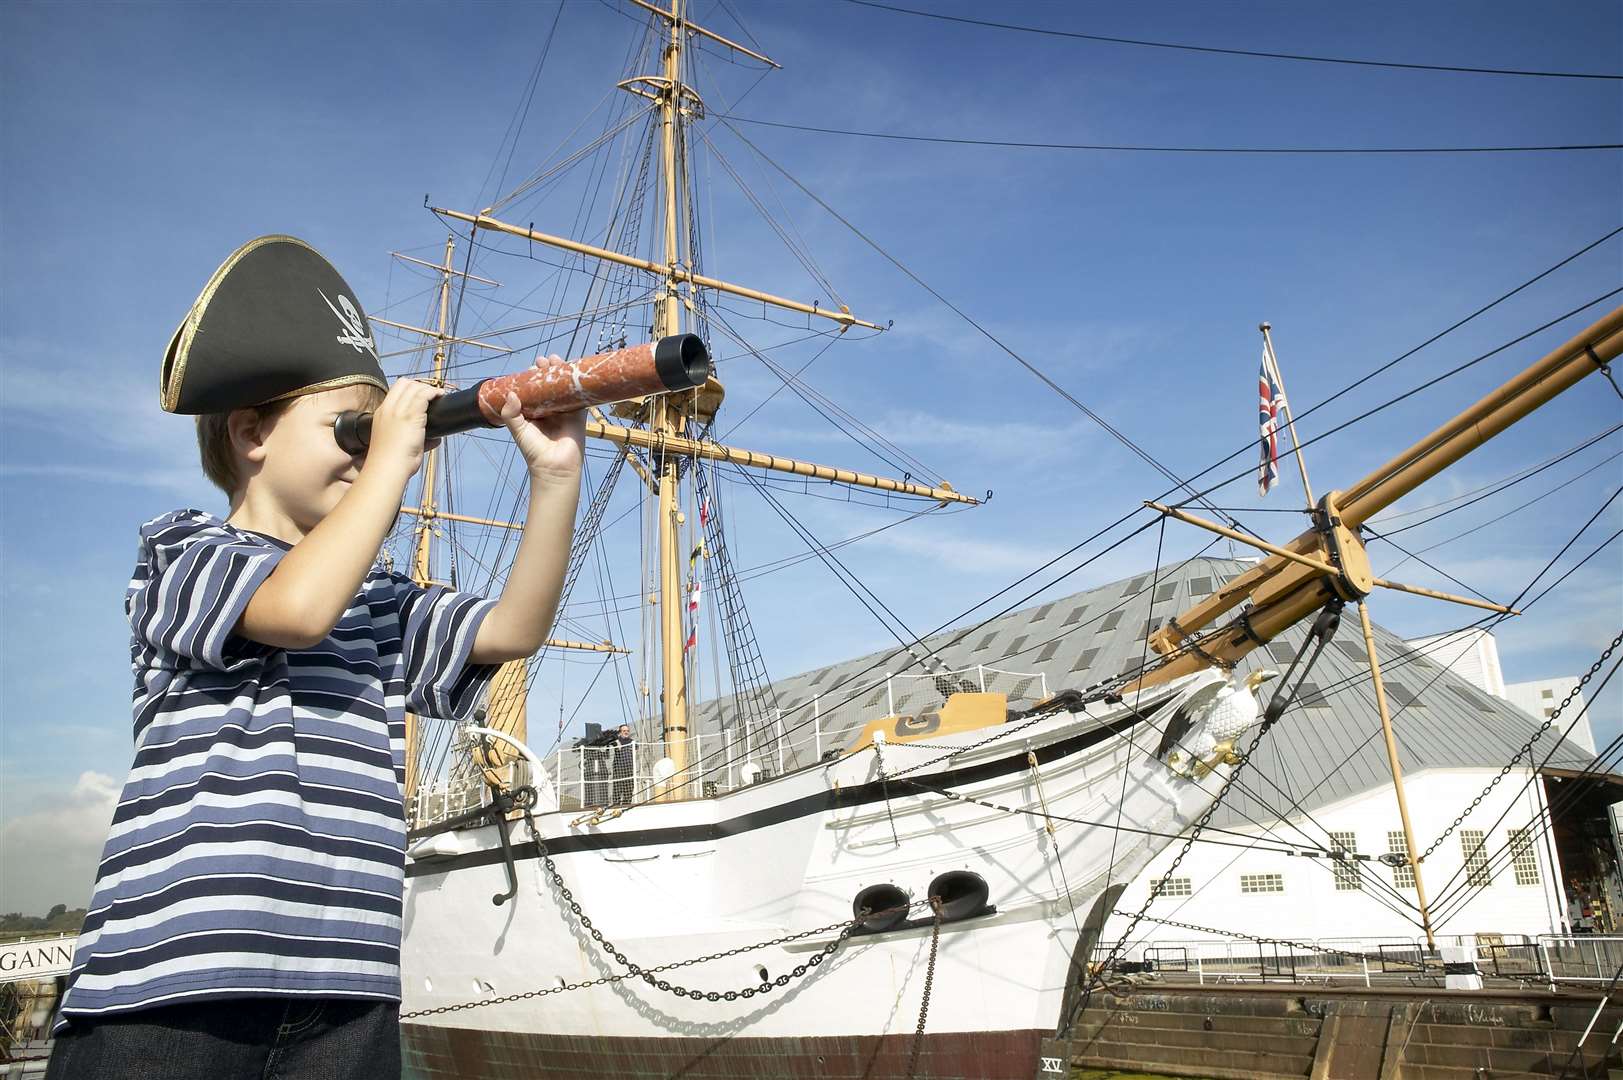 Chatham Historic Dockyard will receive £380,000 to support many of its educational programmes and support visitor experiences when the site reopens